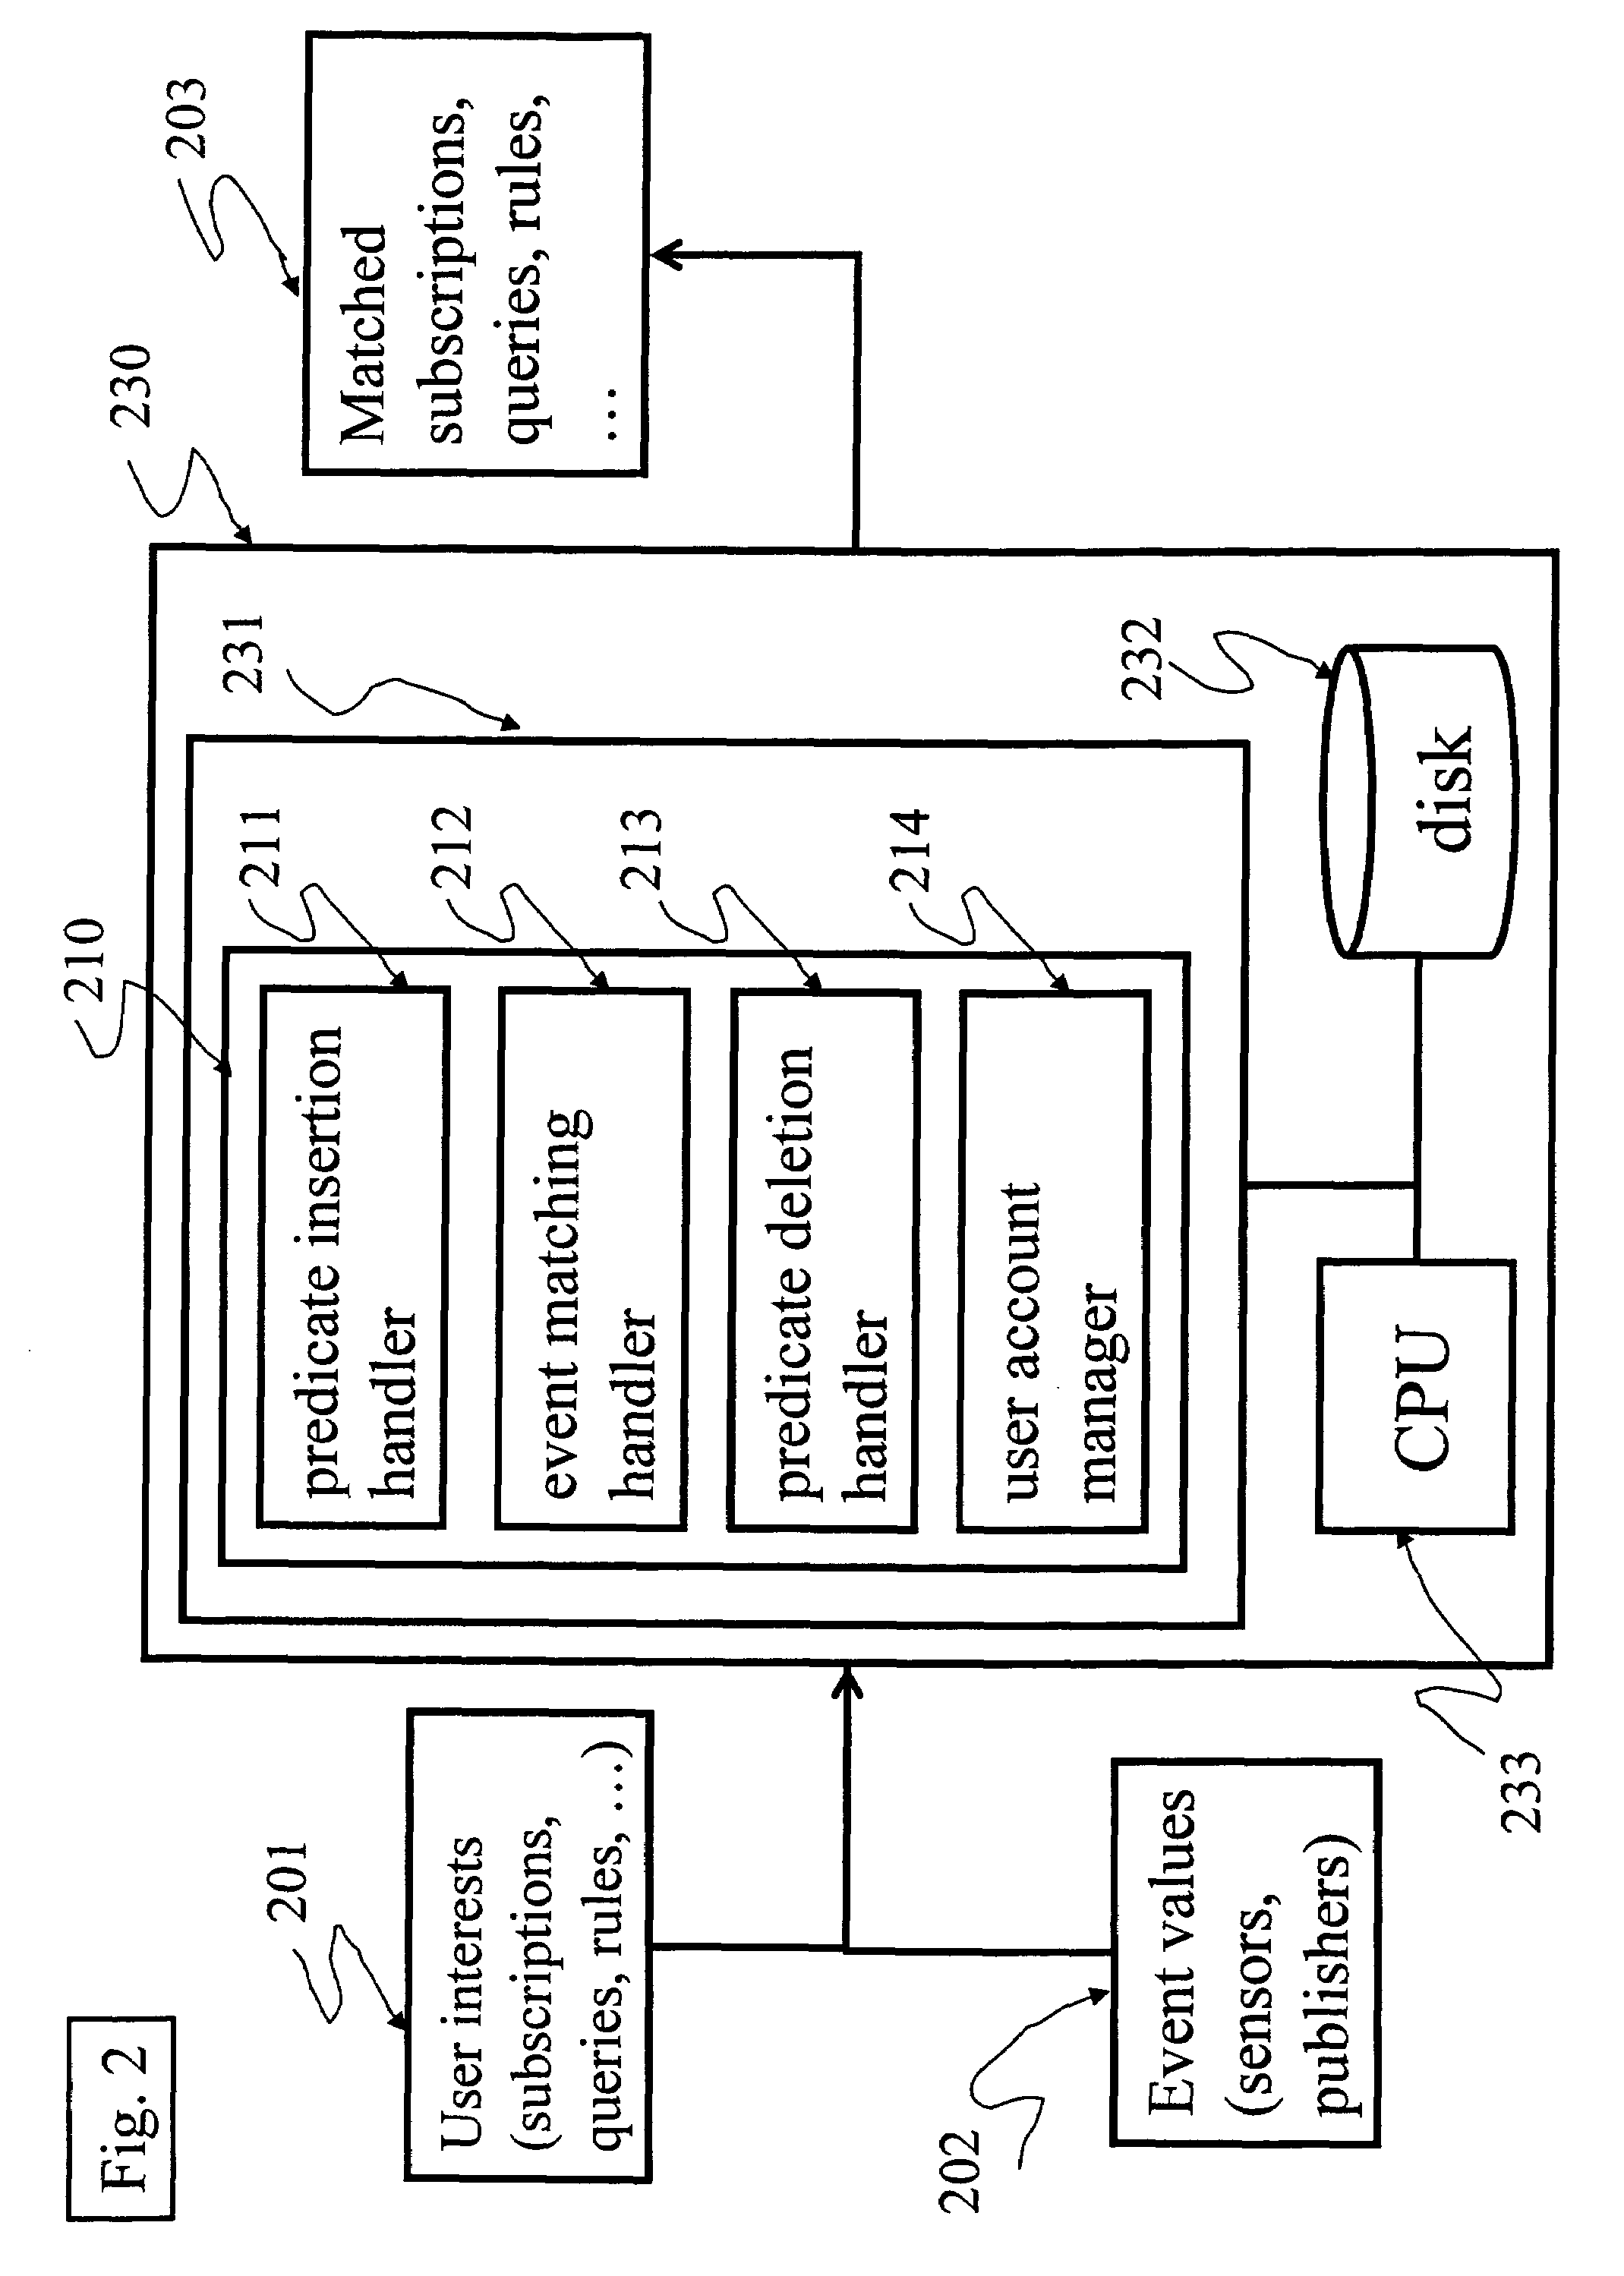 System and method for indexing queries, rules and subscriptions